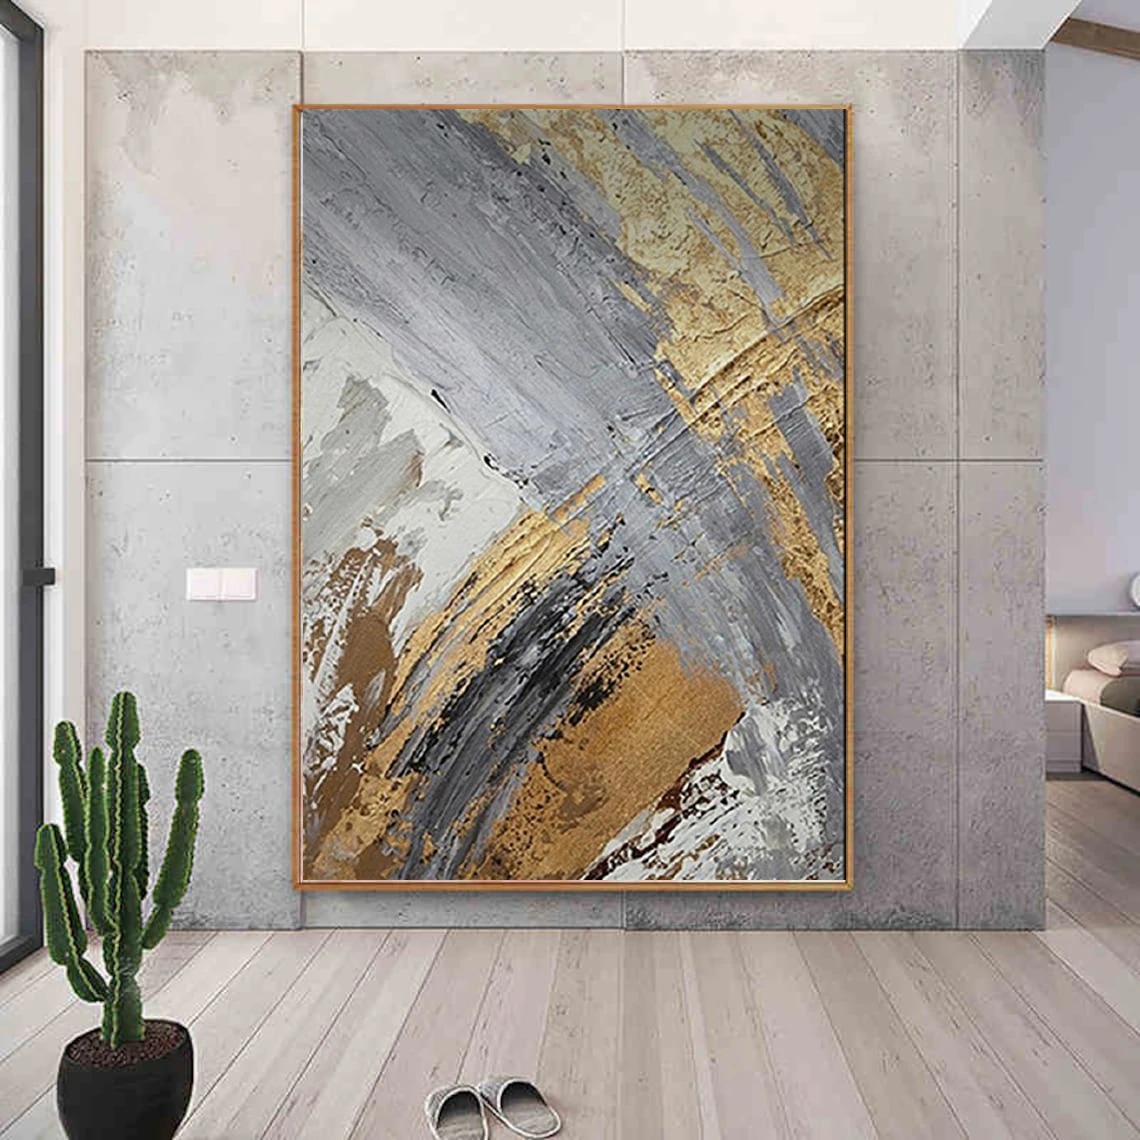 

Large Handmade Textured Oil Painting On Canvas Modern Abstract POP Geometry Wall Art Picture For Living Room Bedroom Room Decor